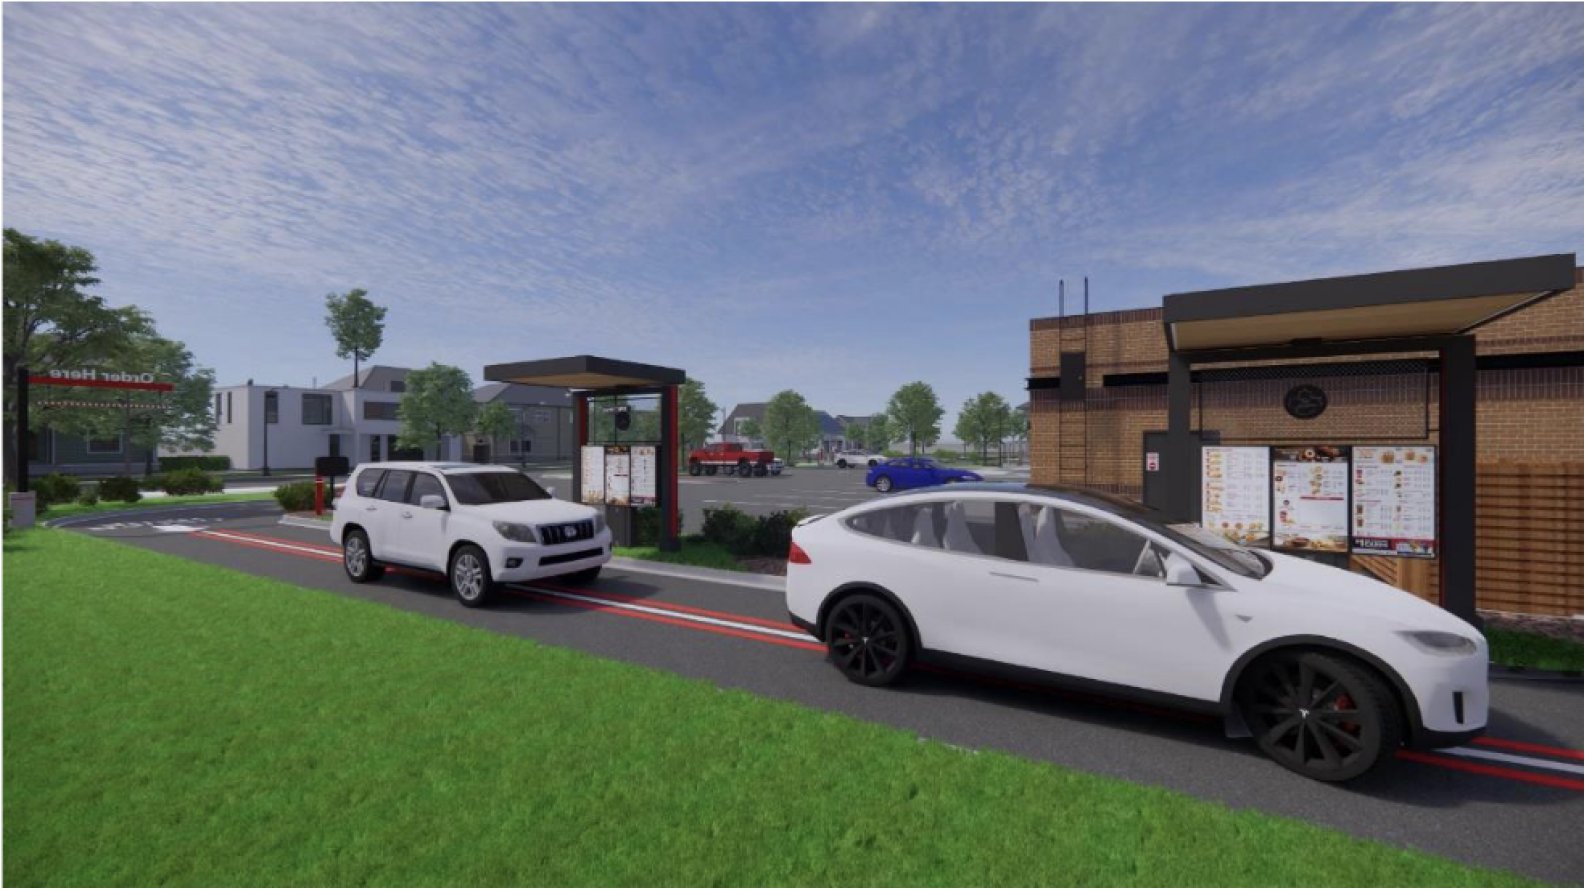 Tim Hortons drive-thru concept can serve two cars at a time. Source: Tim Hortons